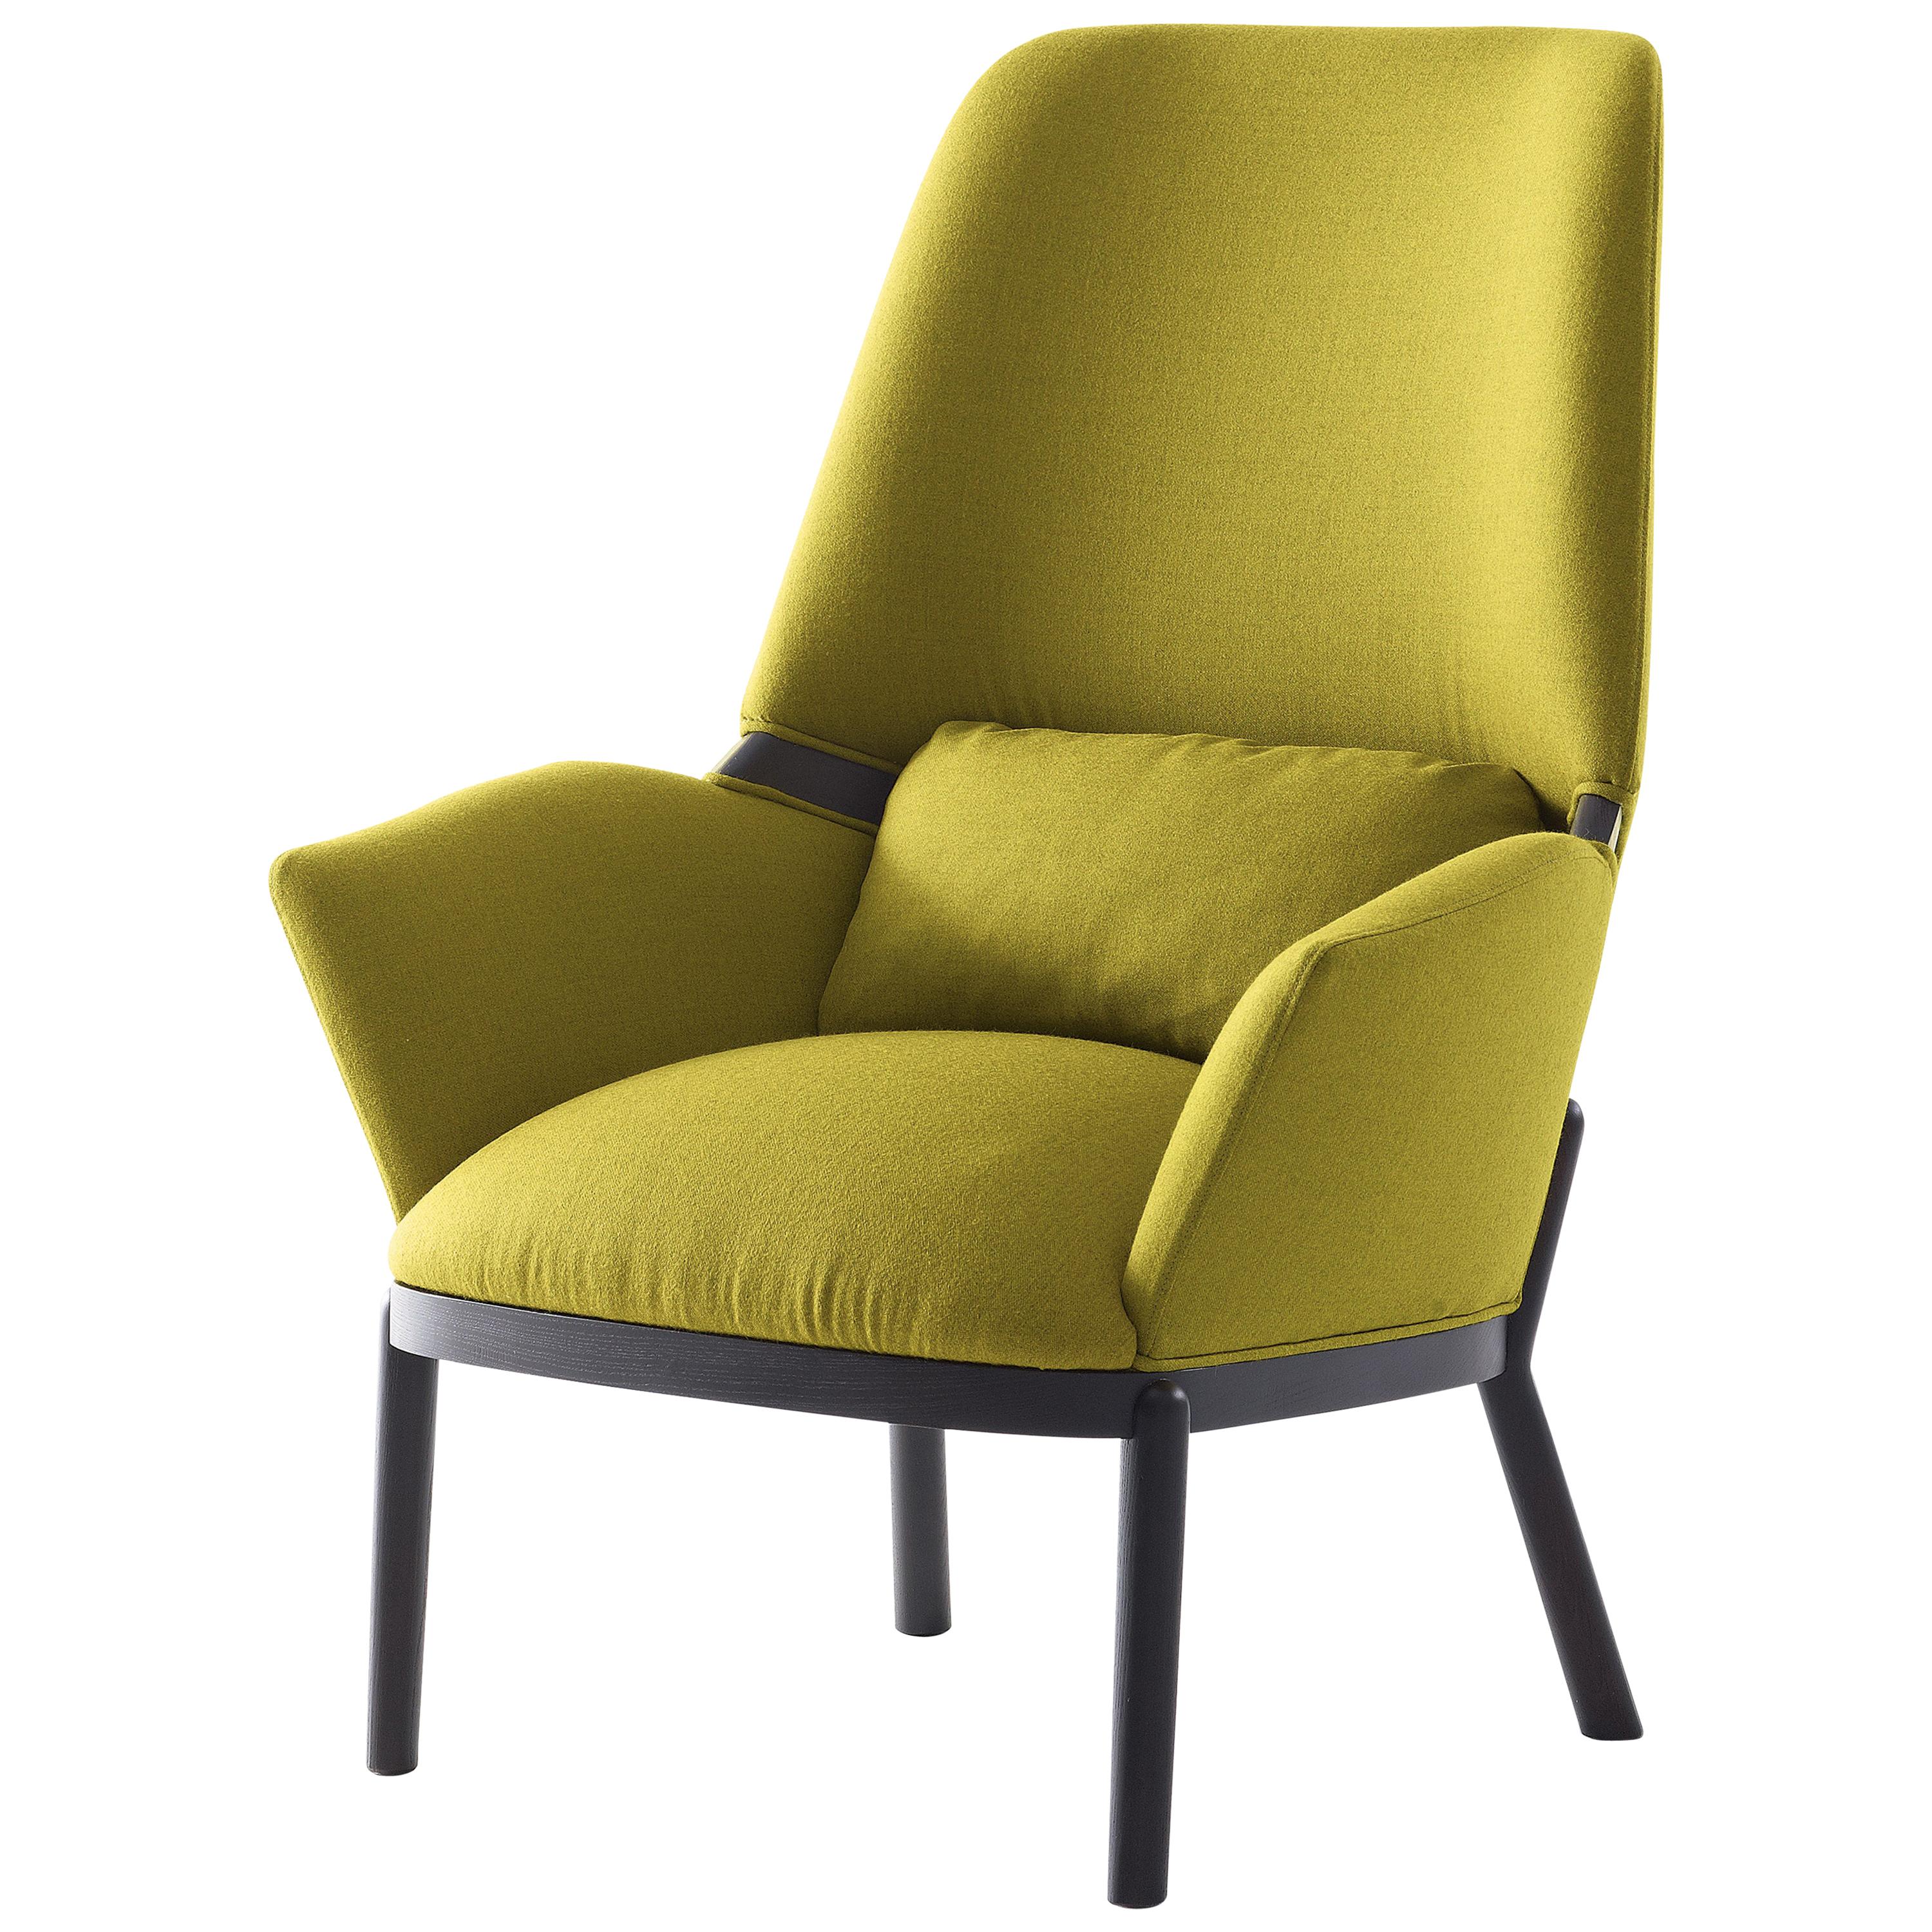 Arflex Serena Armchair in Lama Fabric with Wenge Stained Legs by Luca Nichetto 